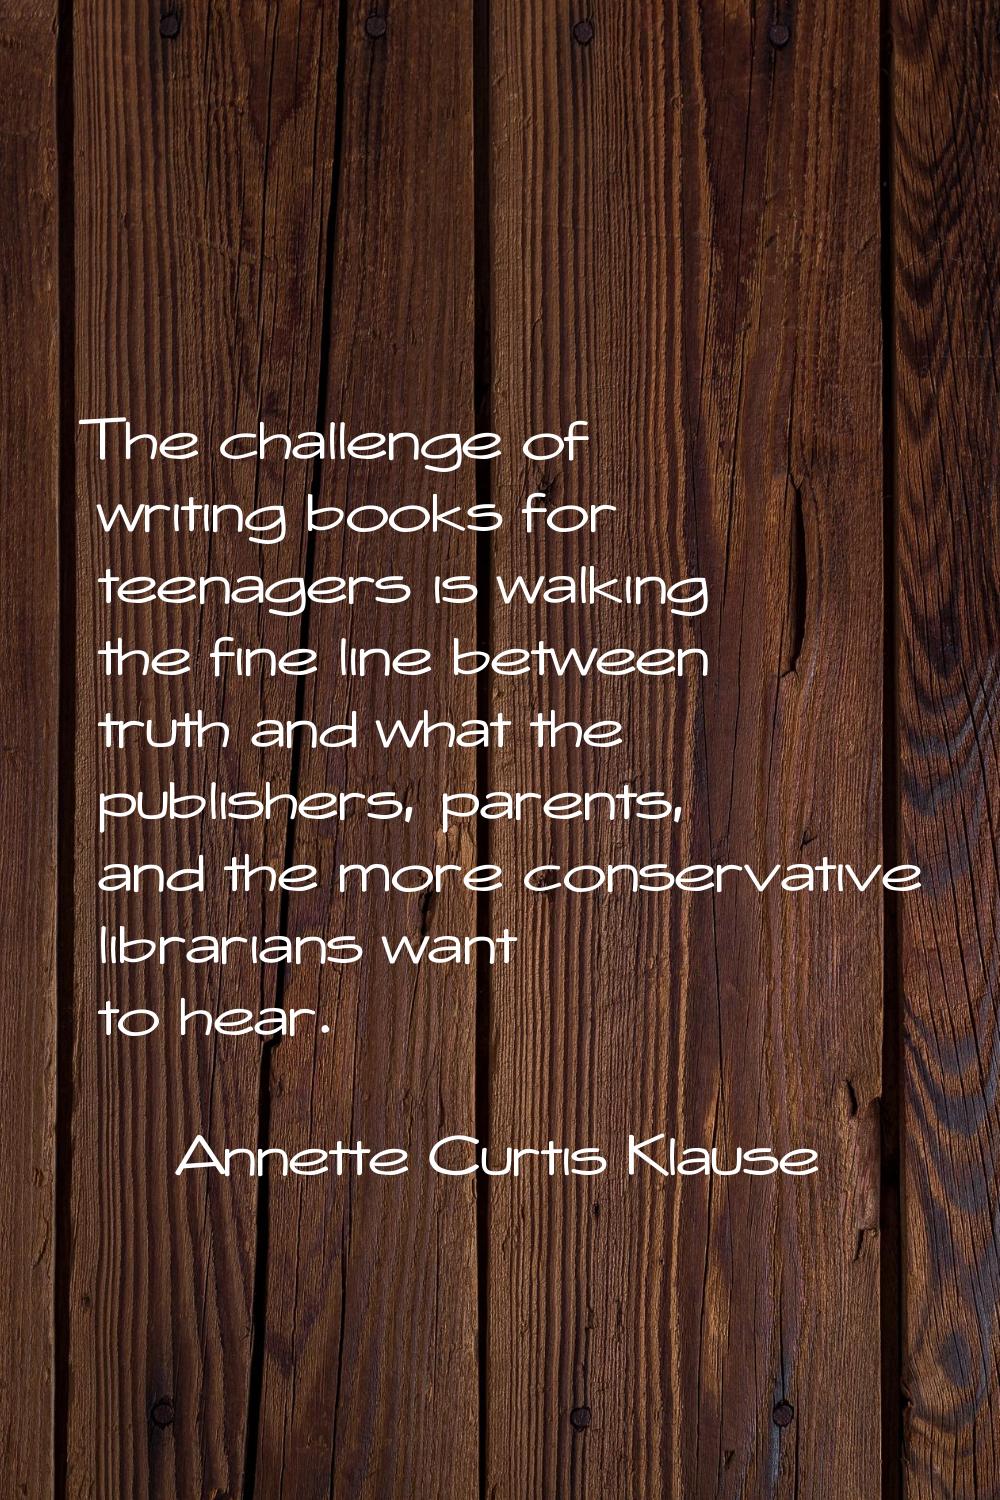 The challenge of writing books for teenagers is walking the fine line between truth and what the pu